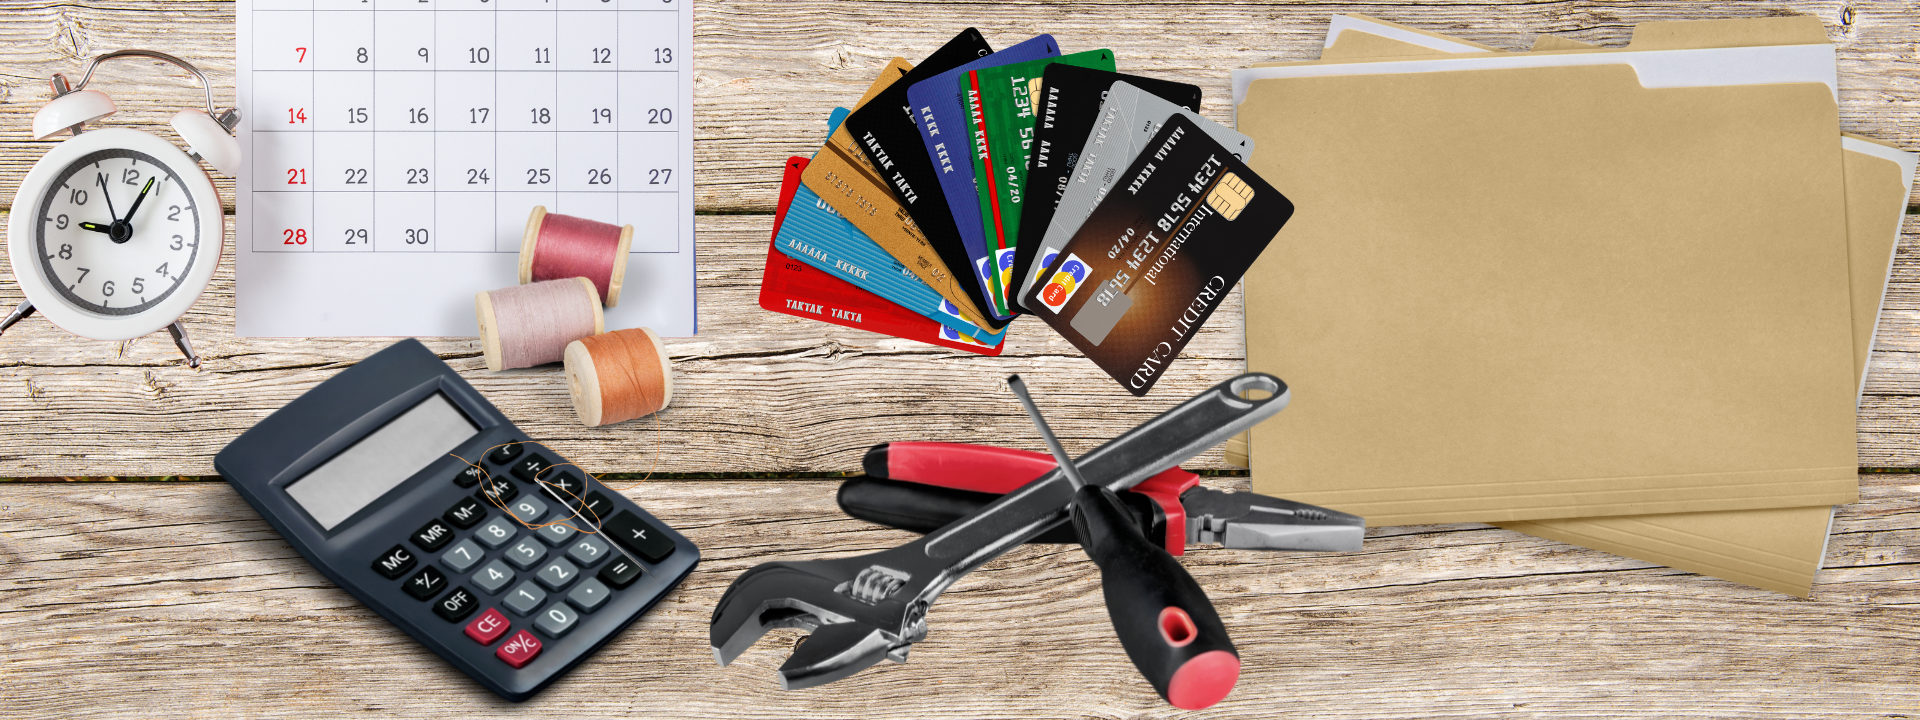 calculator credit cards and tools on desk